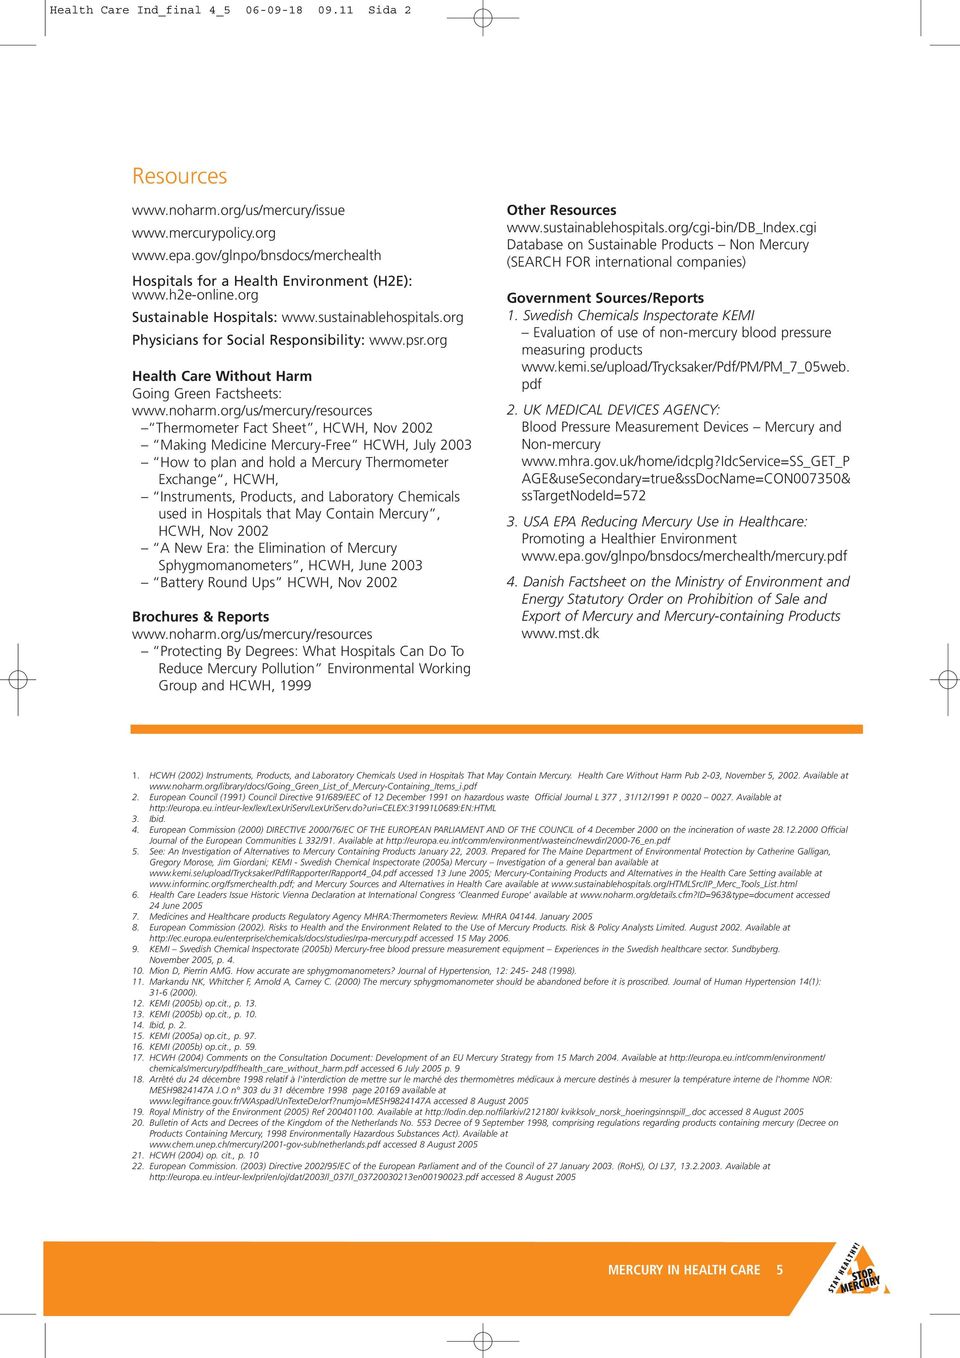 org/us/mercury/resources Thermometer Fact Sheet, HCWH, Nov 2002 Making Medicine Mercury-Free HCWH, July 2003 How to plan and hold a Mercury Thermometer Exchange, HCWH, Instruments, Products, and